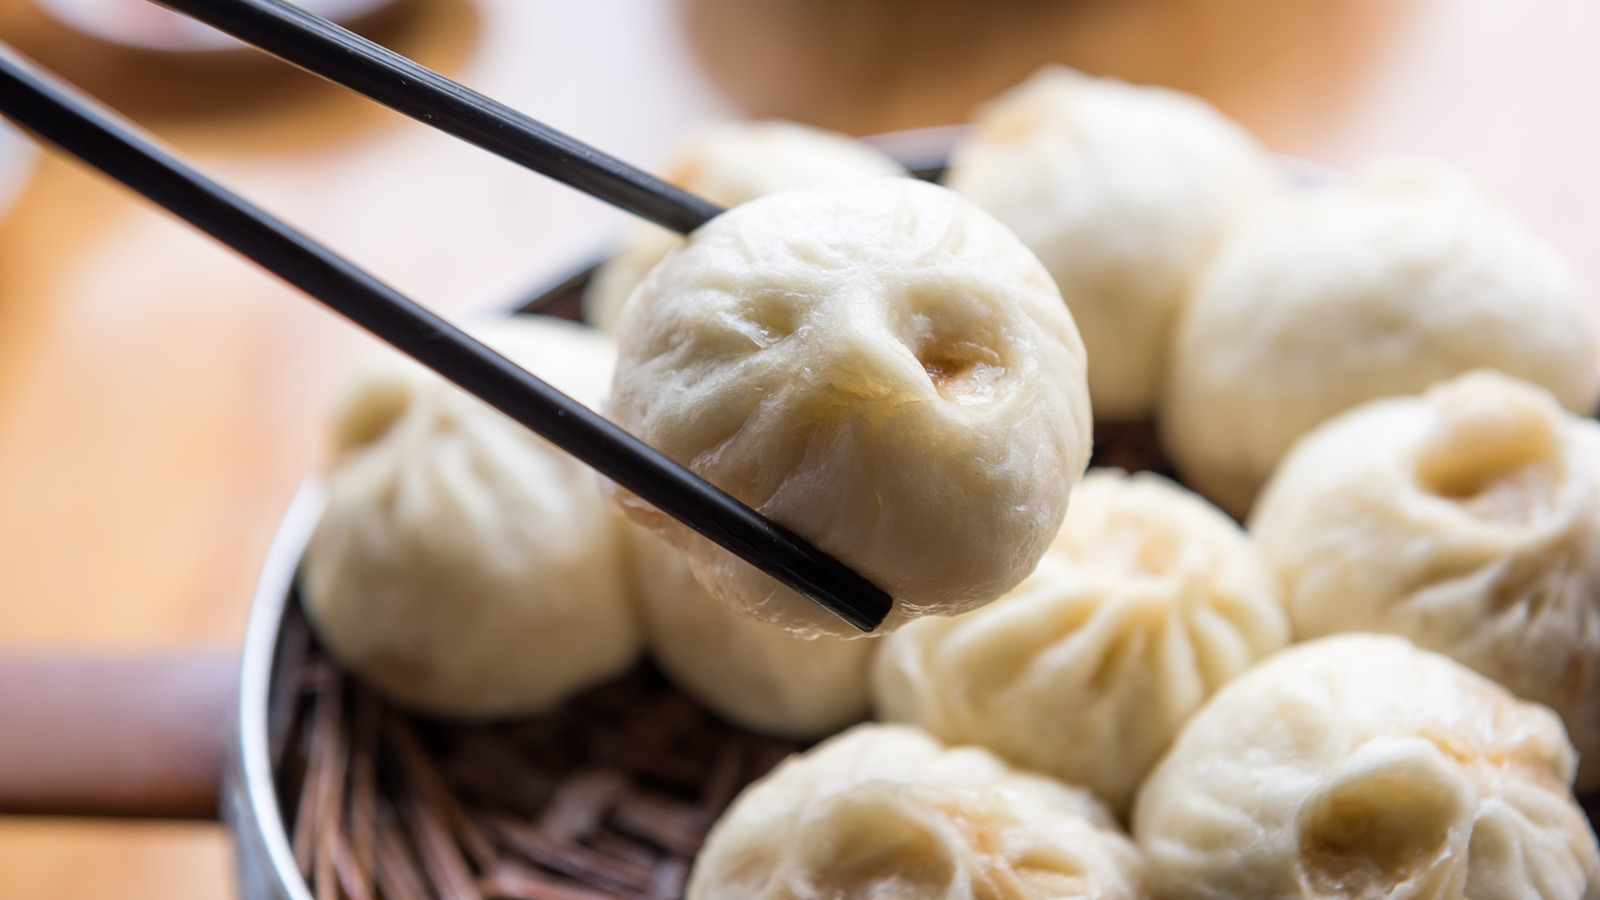 https://www.mashed.com/img/gallery/how-do-costcos-soup-dumplings-compare-to-trader-joes/l-intro-1682479731.jpg